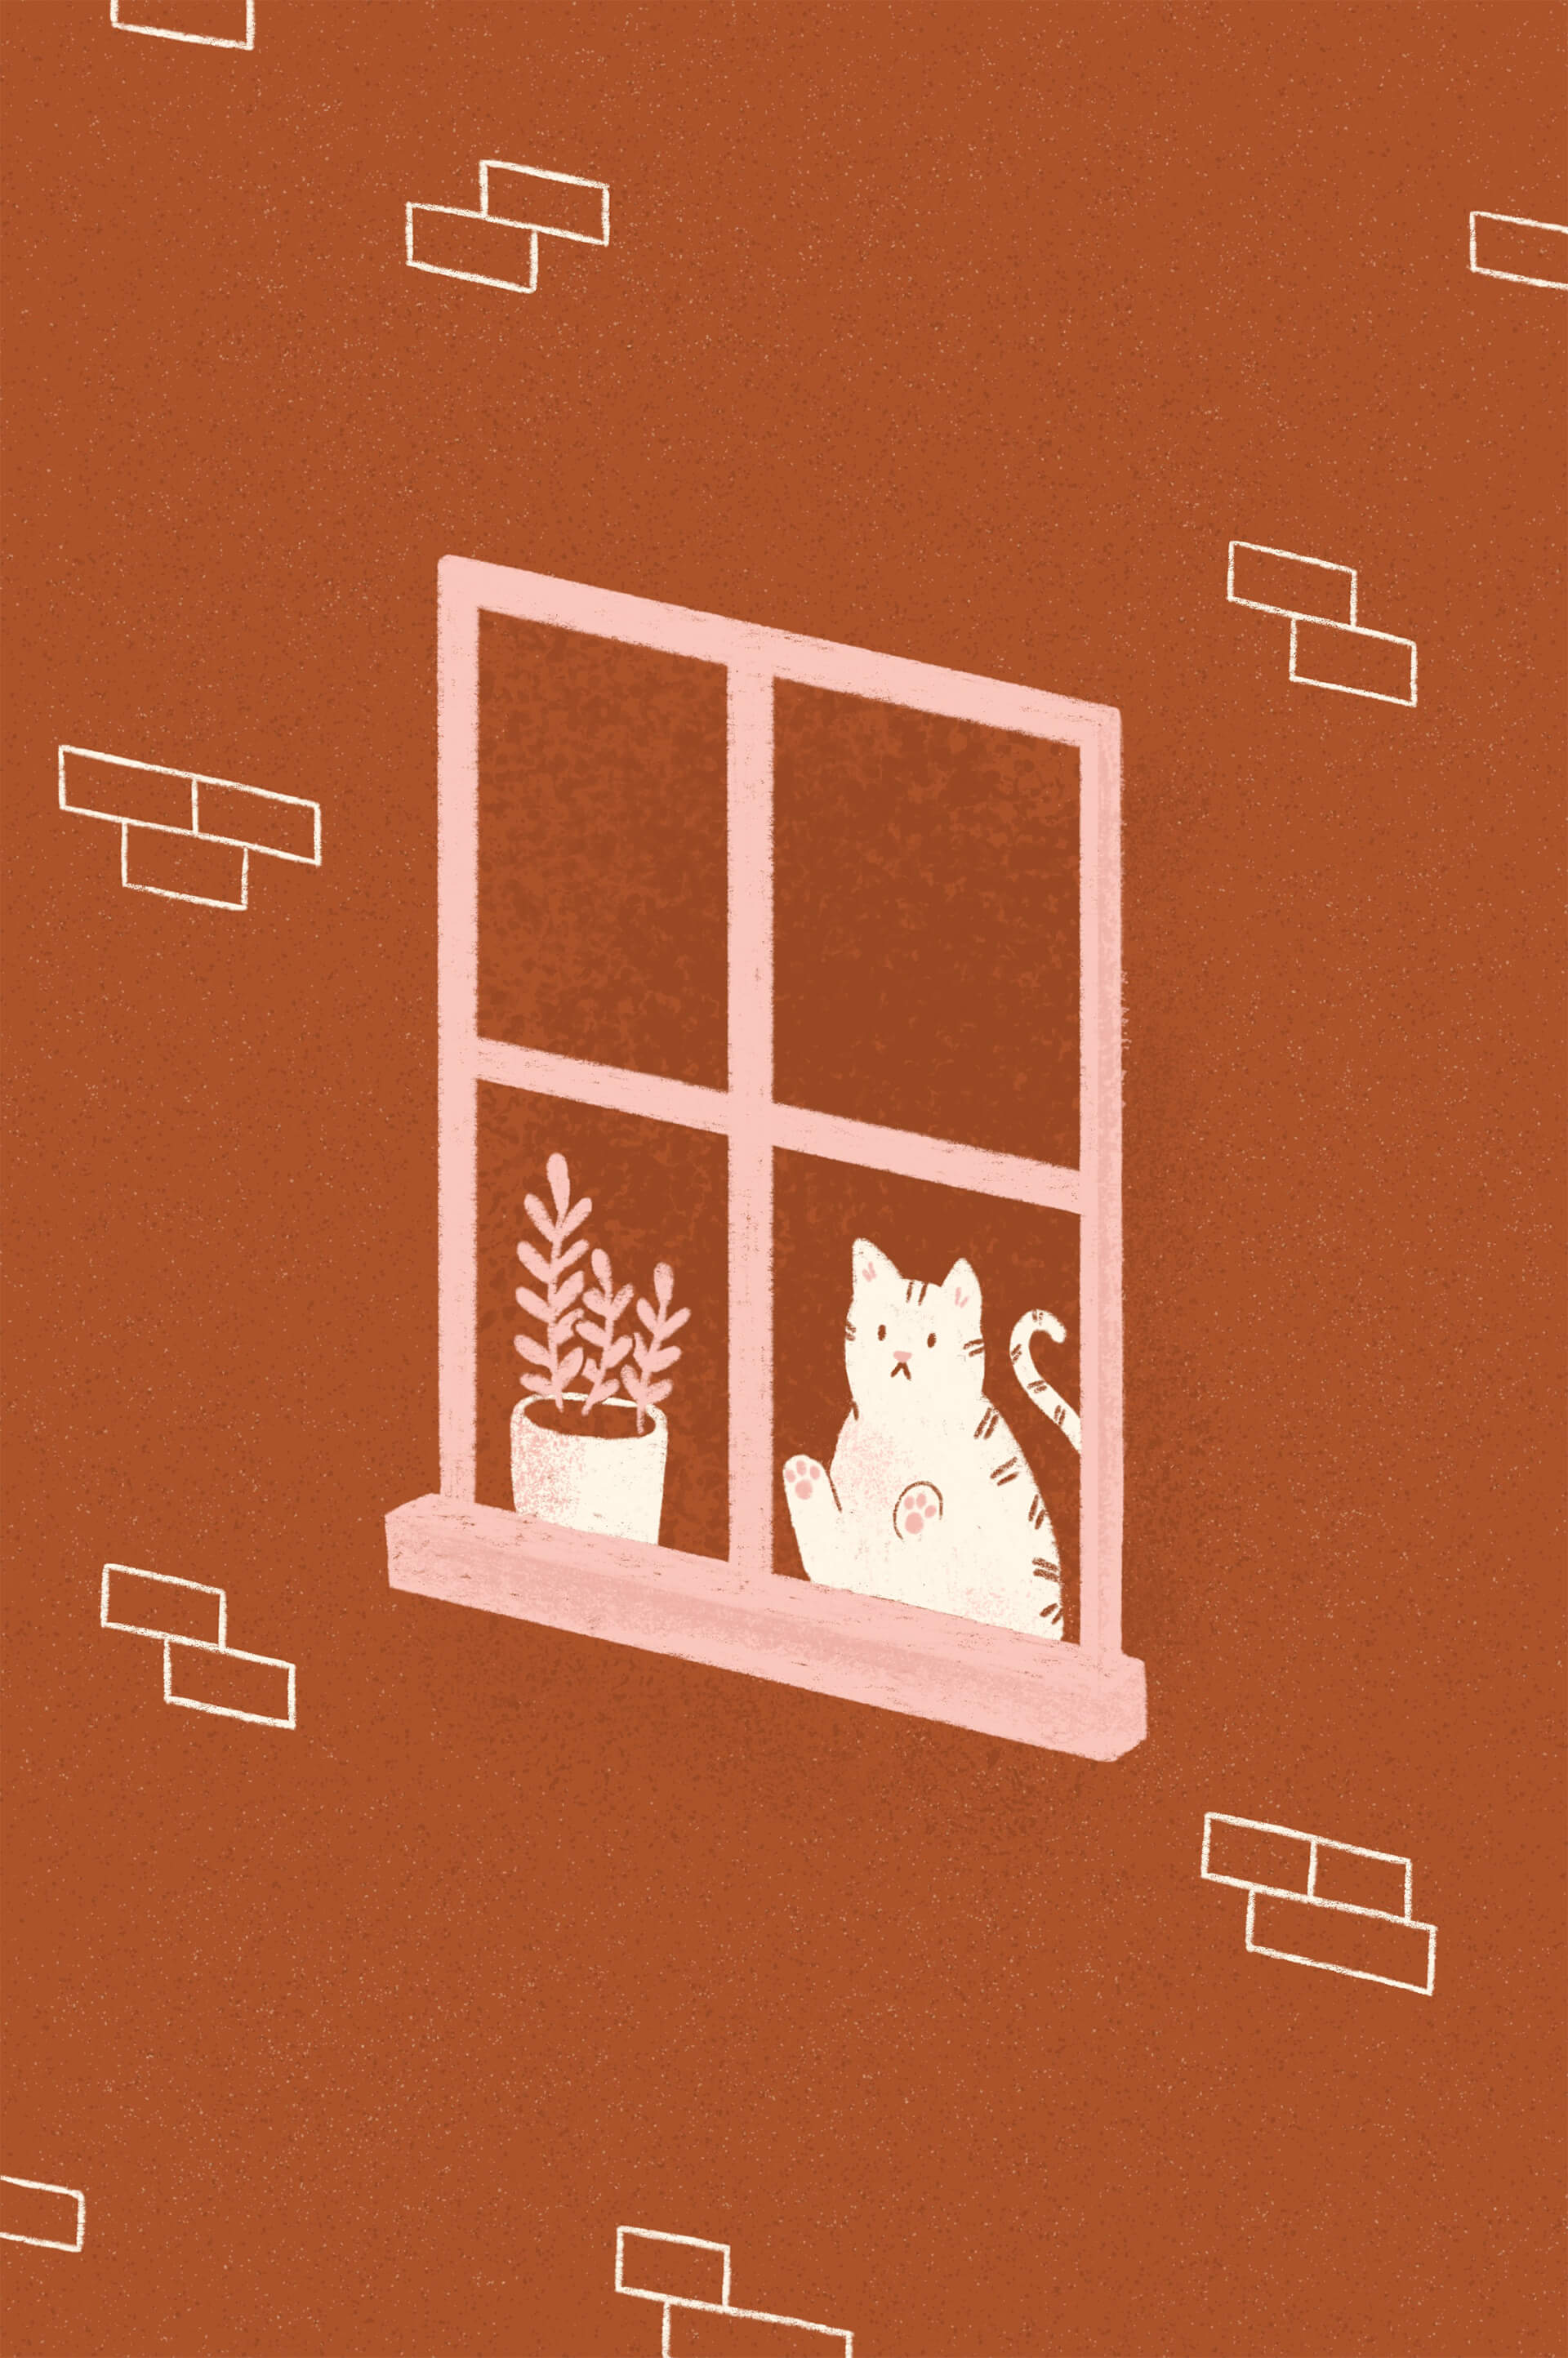 A little cat presses its paw against a window